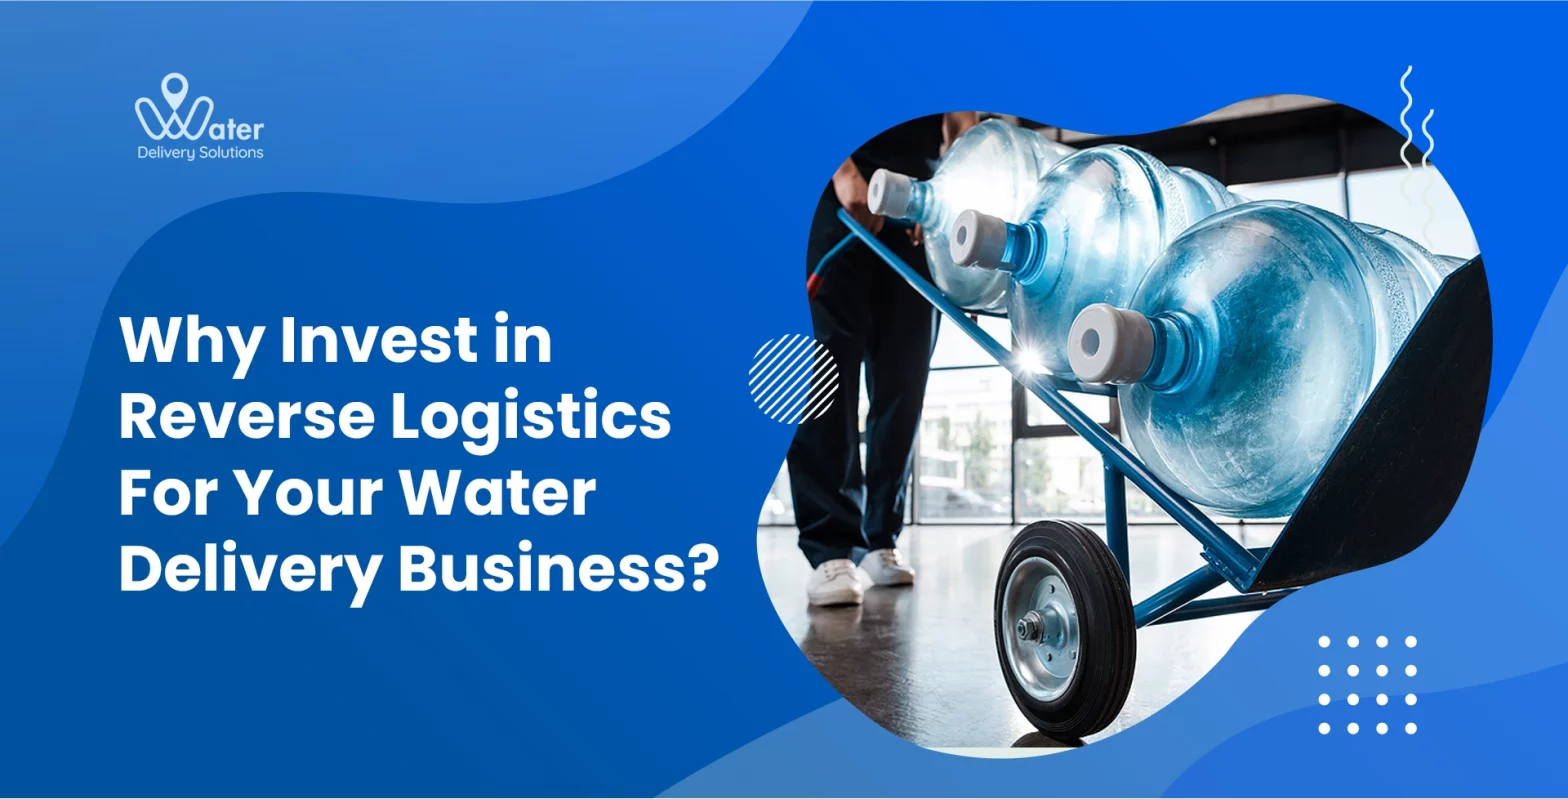 wds-founded-by-ravi-garg-website-insights-why-invest-in-reverse-logistics-for-your-water-delivery-business